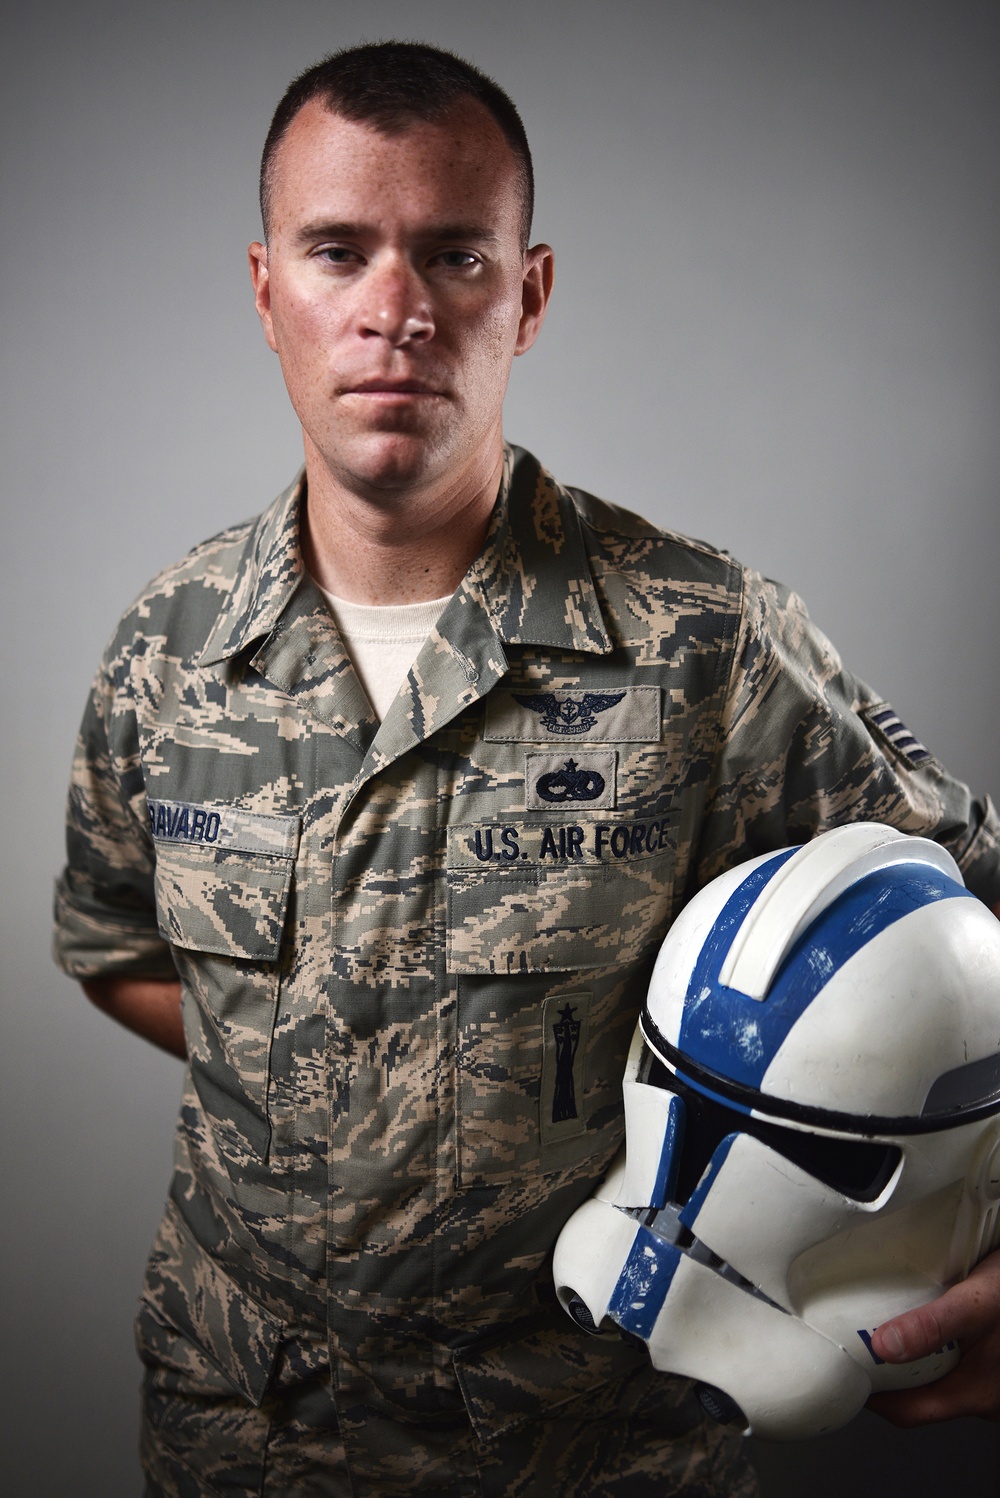 New York Air National Guard member is also Star Wars Clone Trooper